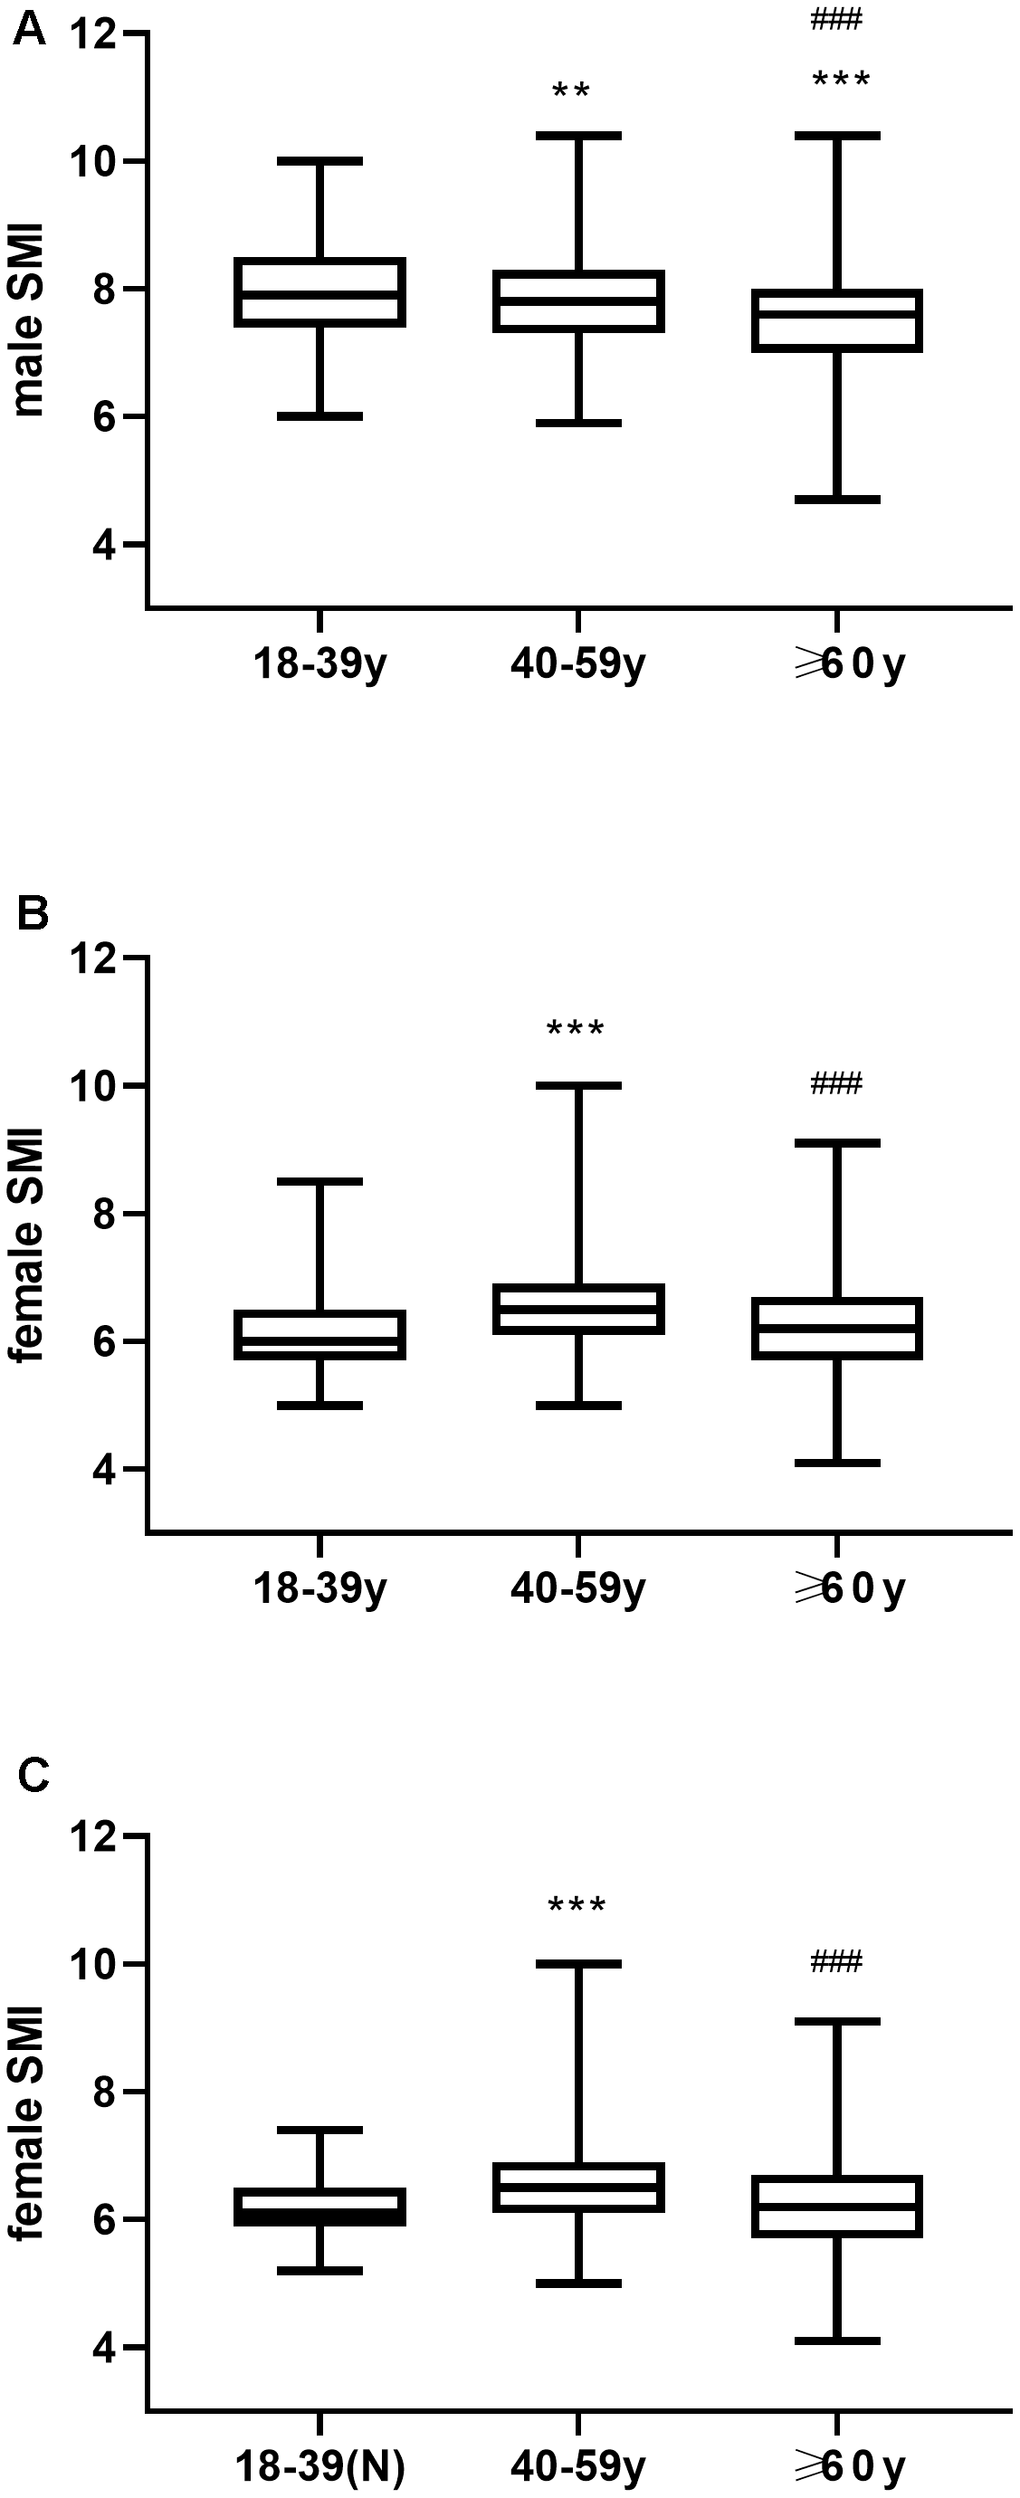 (A) Mean SMI in young, middle-aged and elderly men. (B) Mean SMI in young, middle-aged and elderly women. (C) Mean SMI in young women with normal BMI (18.5-23.9) as well as middle-aged and elderly women. ** P ≤0.01 vs 18-39y, *** P ### P 